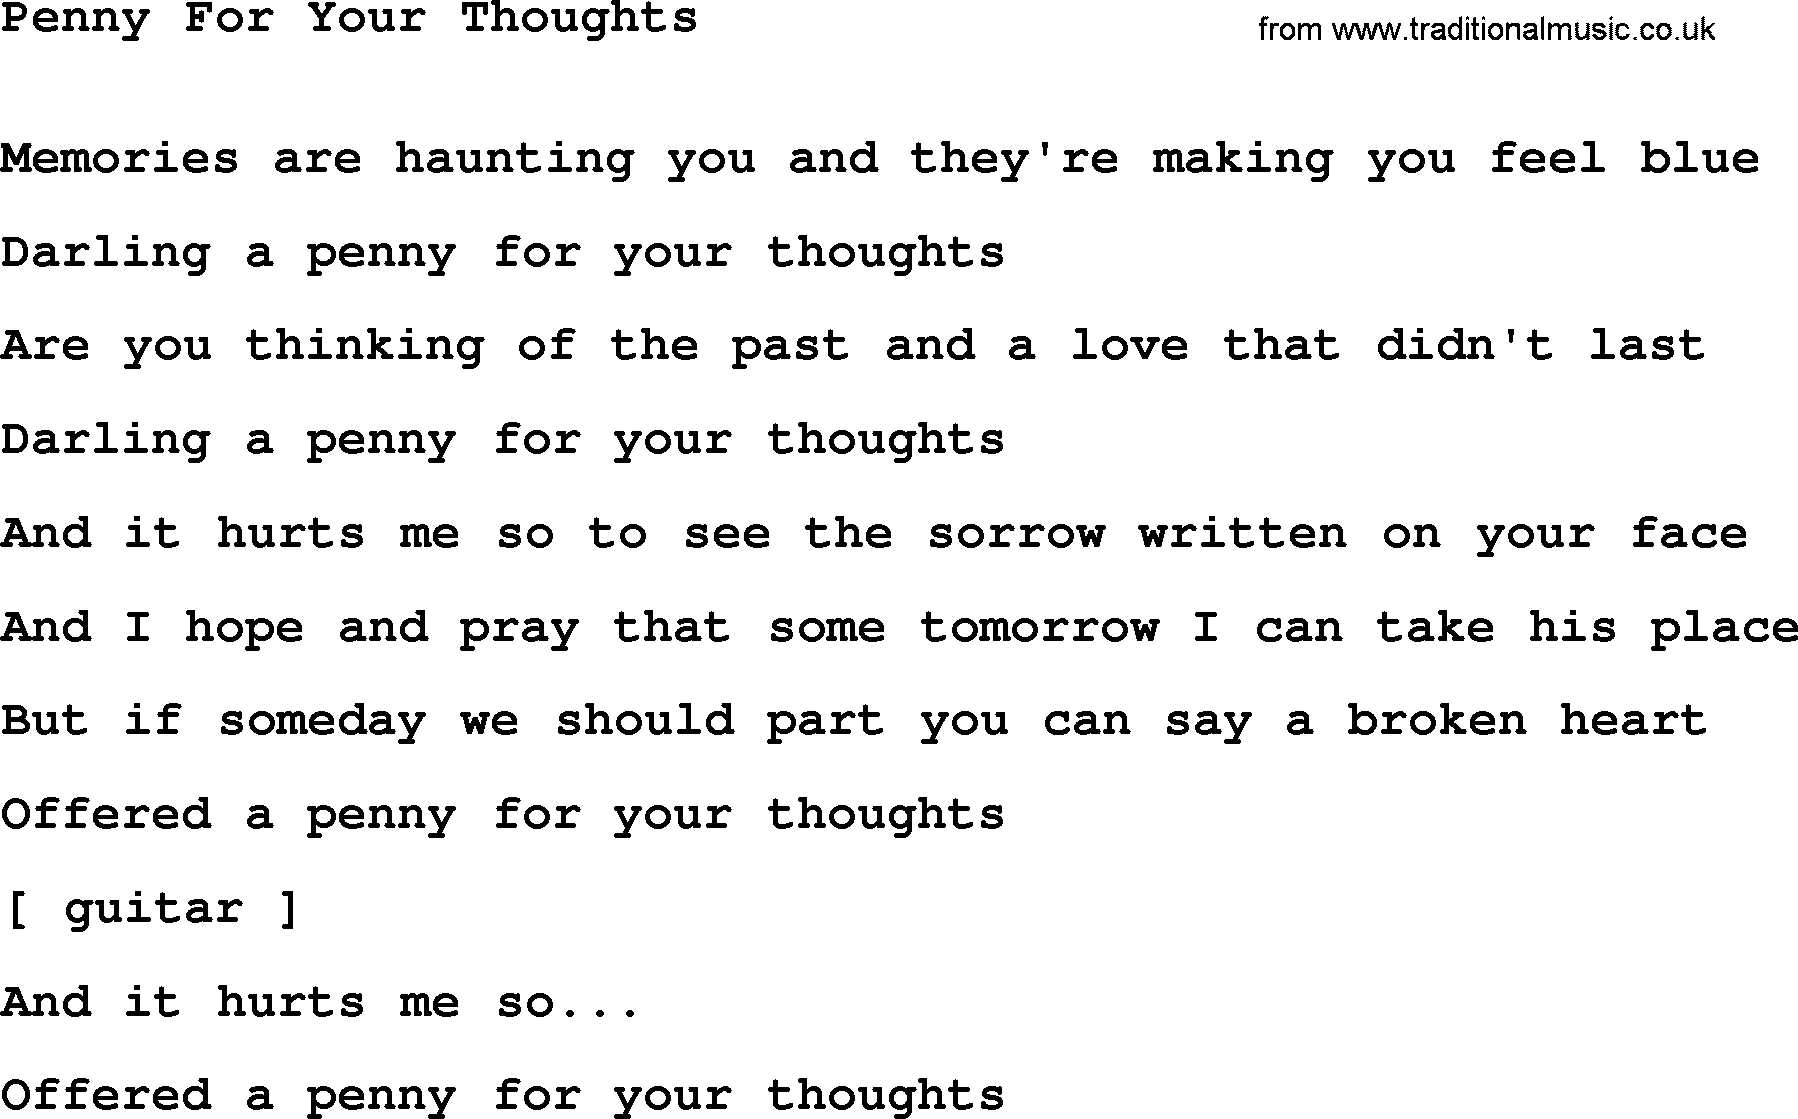 Willie Nelson song: Penny For Your Thoughts lyrics